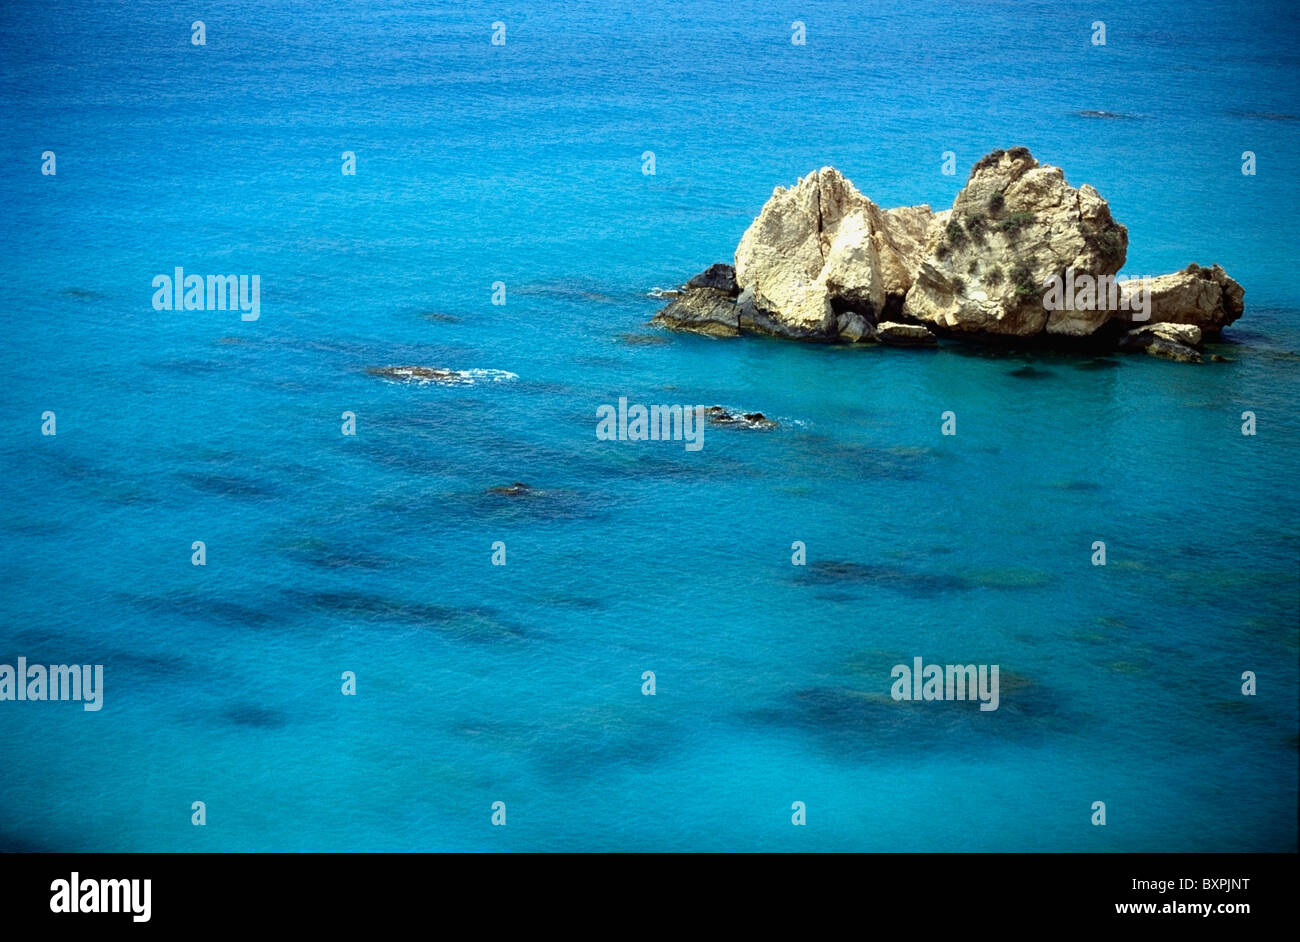 Rcok Formation Standing Out Of Turquoise Water Stock Photo